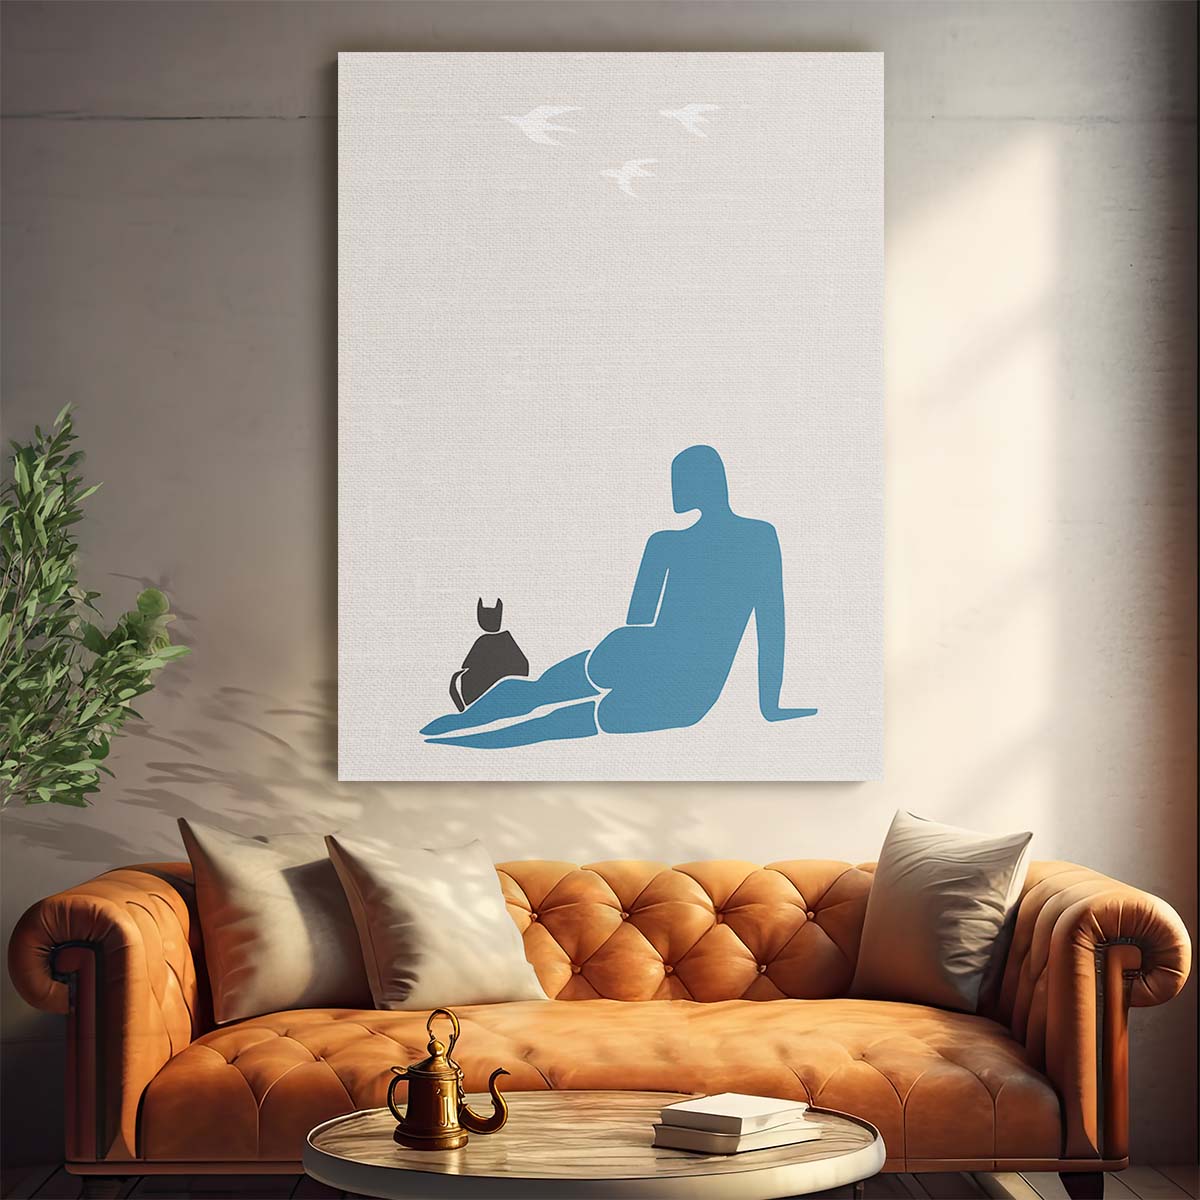 Matisse-inspired Woman with Cat Abstract Paper Cut Illustration Art by Luxuriance Designs, made in USA